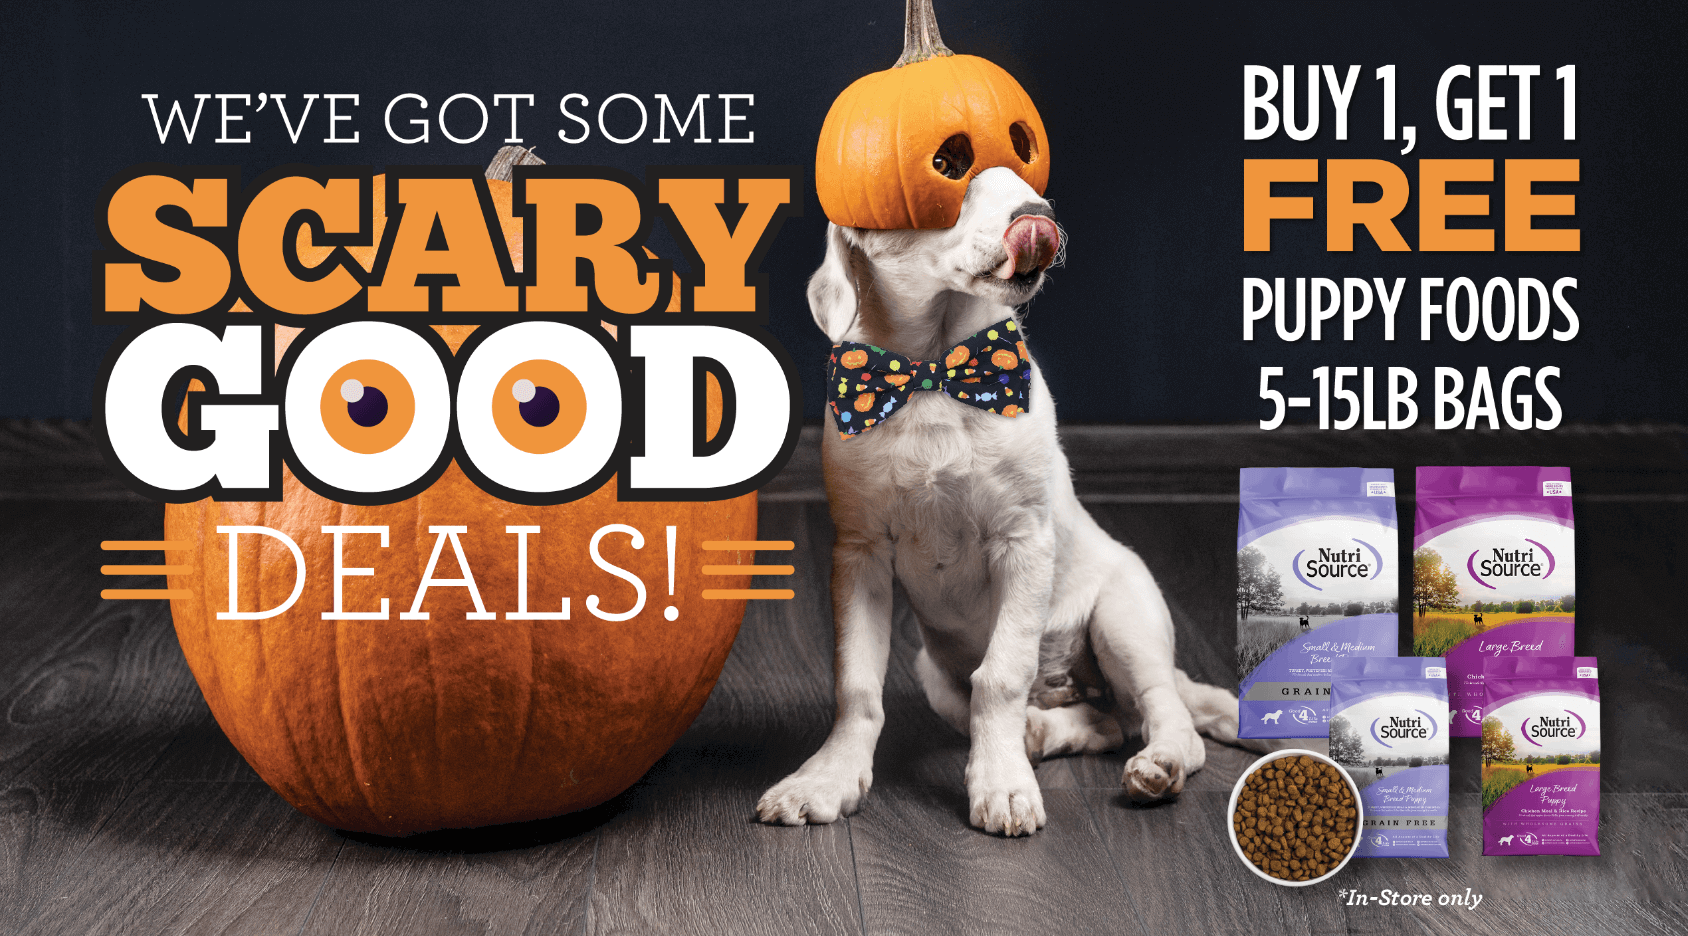 Buy 1, Get 1 FREE NutriSource Puppy Foods 5-15LB Bags